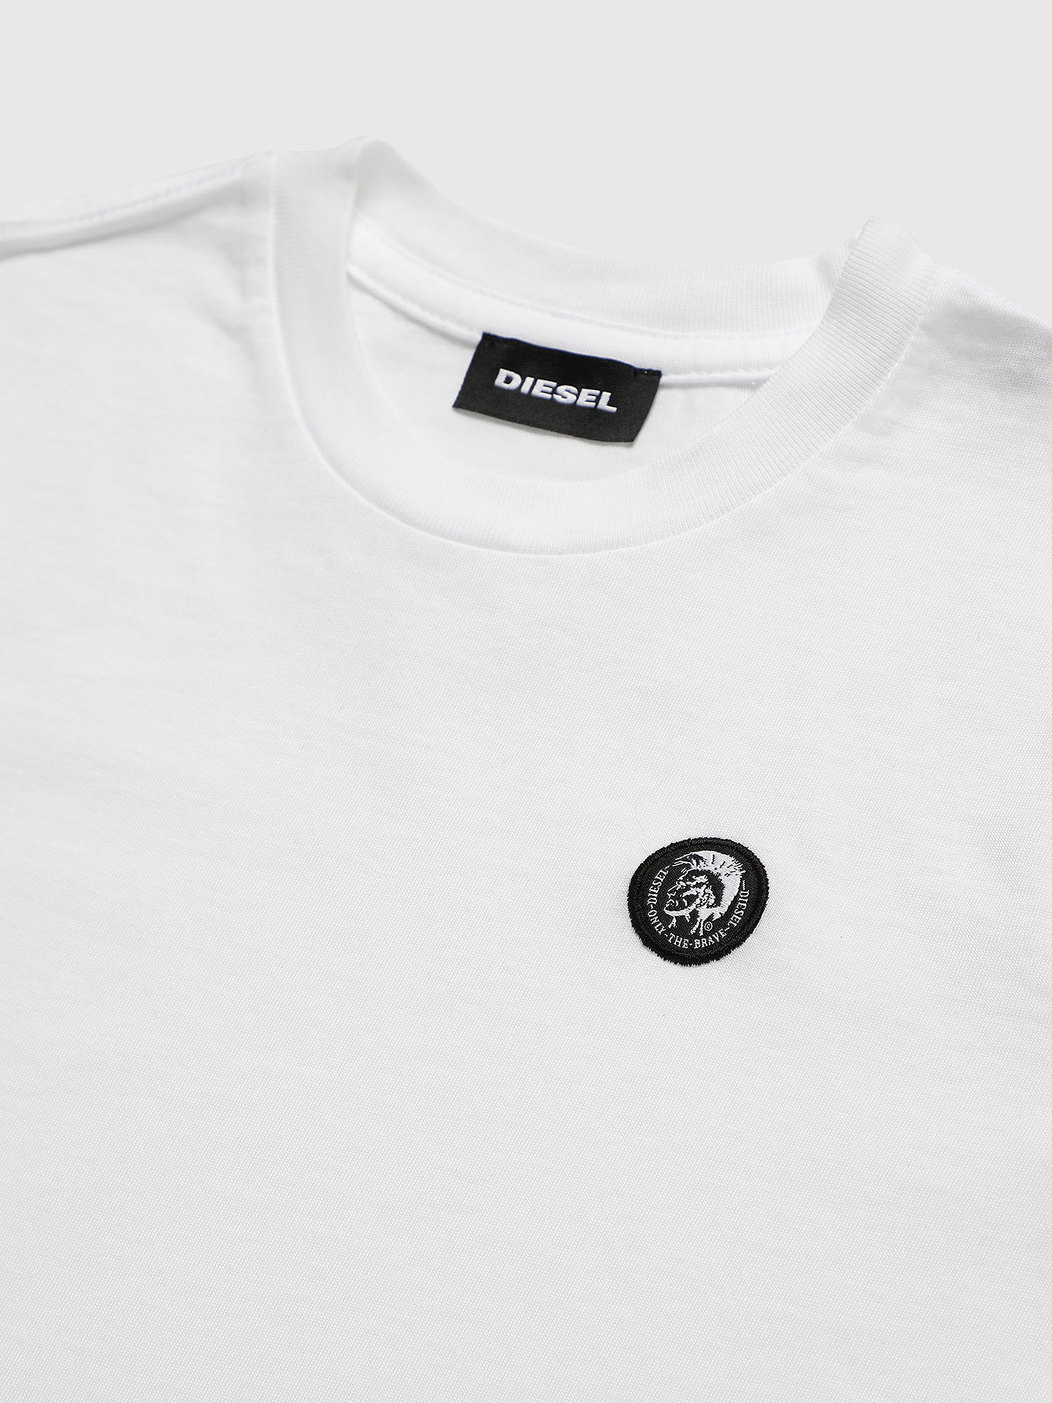 KIDS MONOCHROME T-SHIRT WITH MOHAWK PATCH